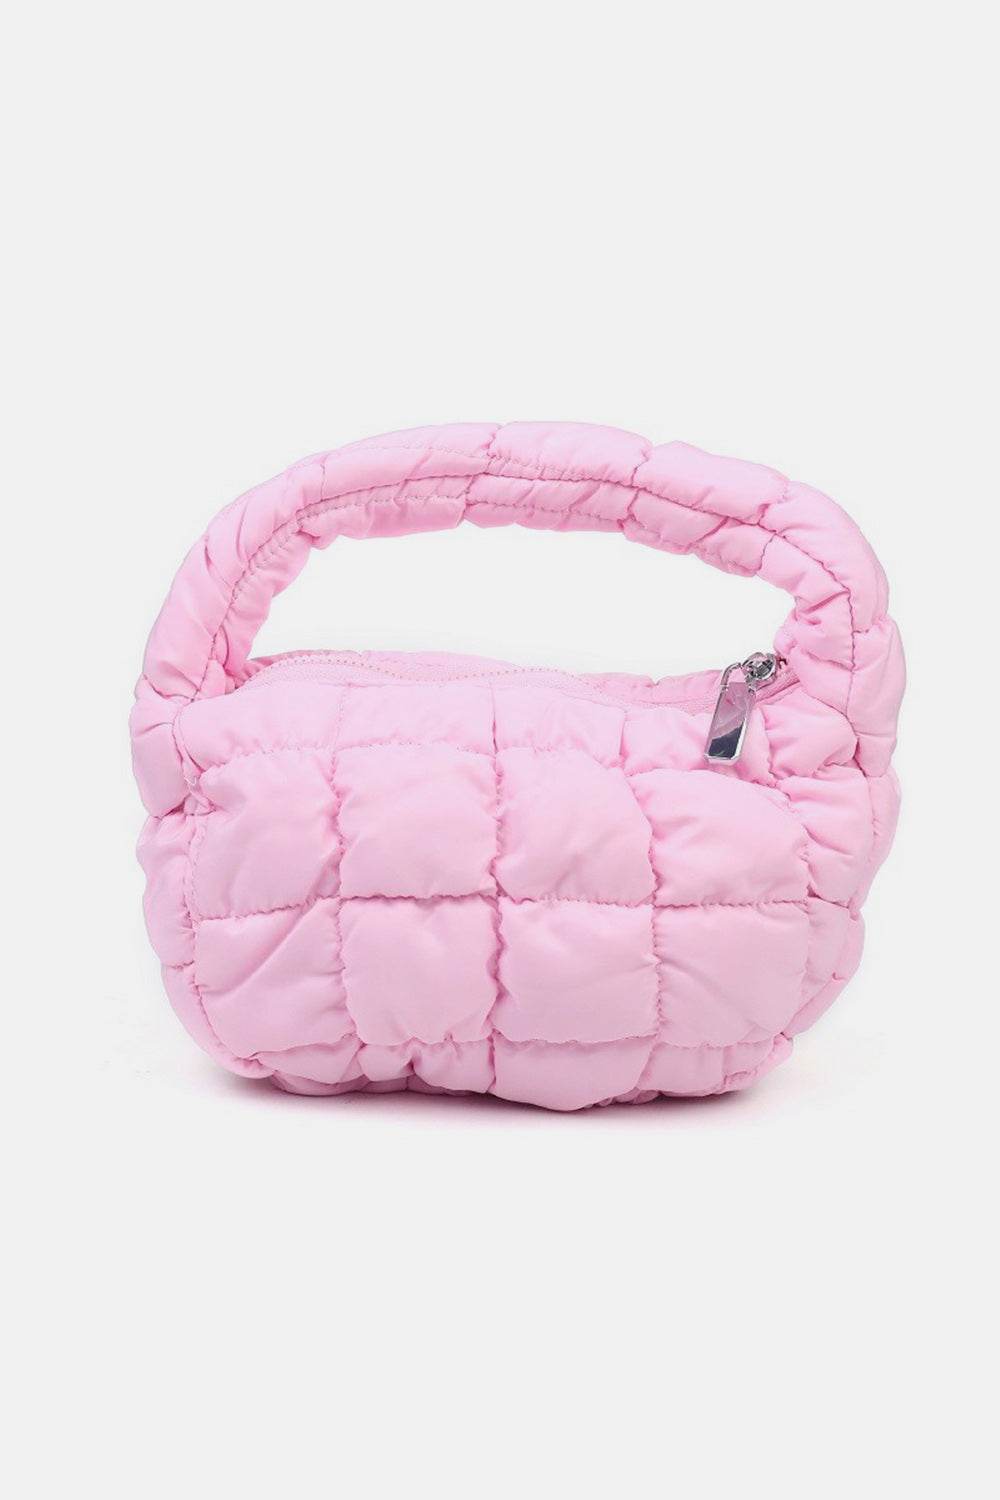 Zenana Quilted Micro Puffy Handbag Pink One Size